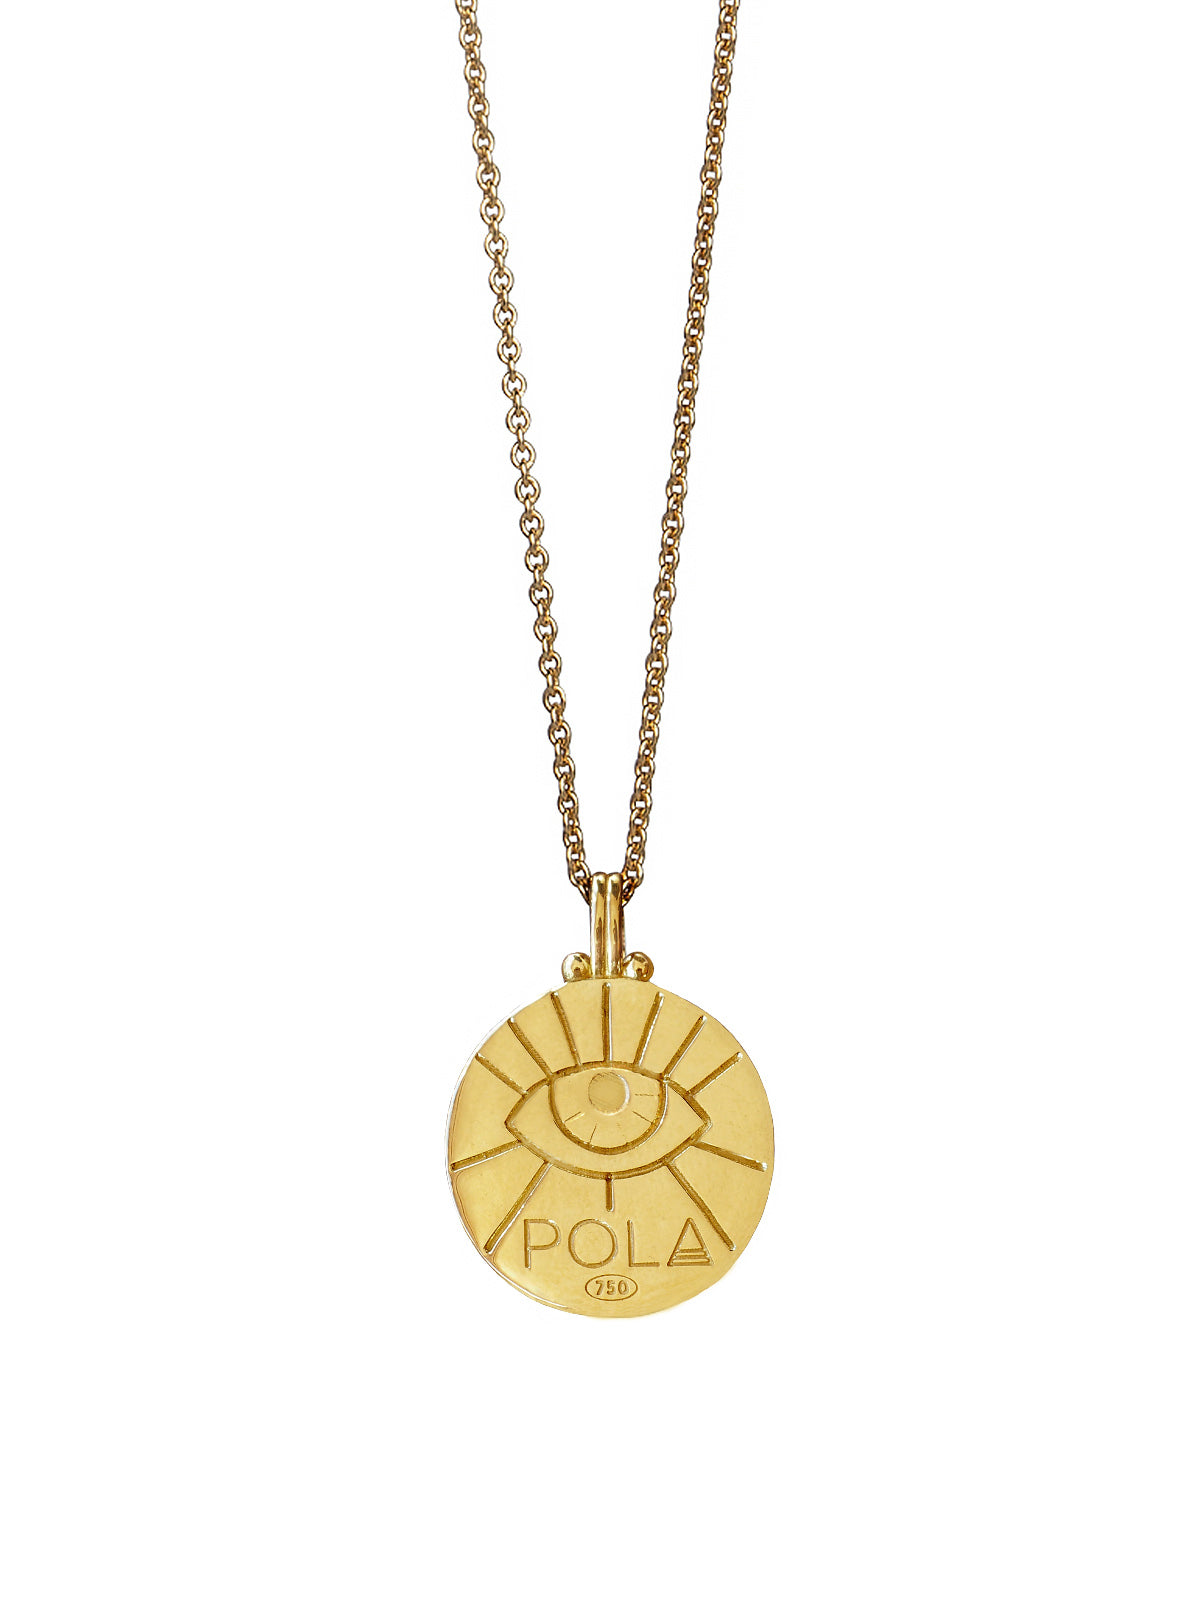 18ct Solid Gold Star Sign Necklace. The pendant features an Evil Eye on the back to ward off any naughty behavior aimed at you, Our logo and the 750 Hallmark for 18ct Gold.